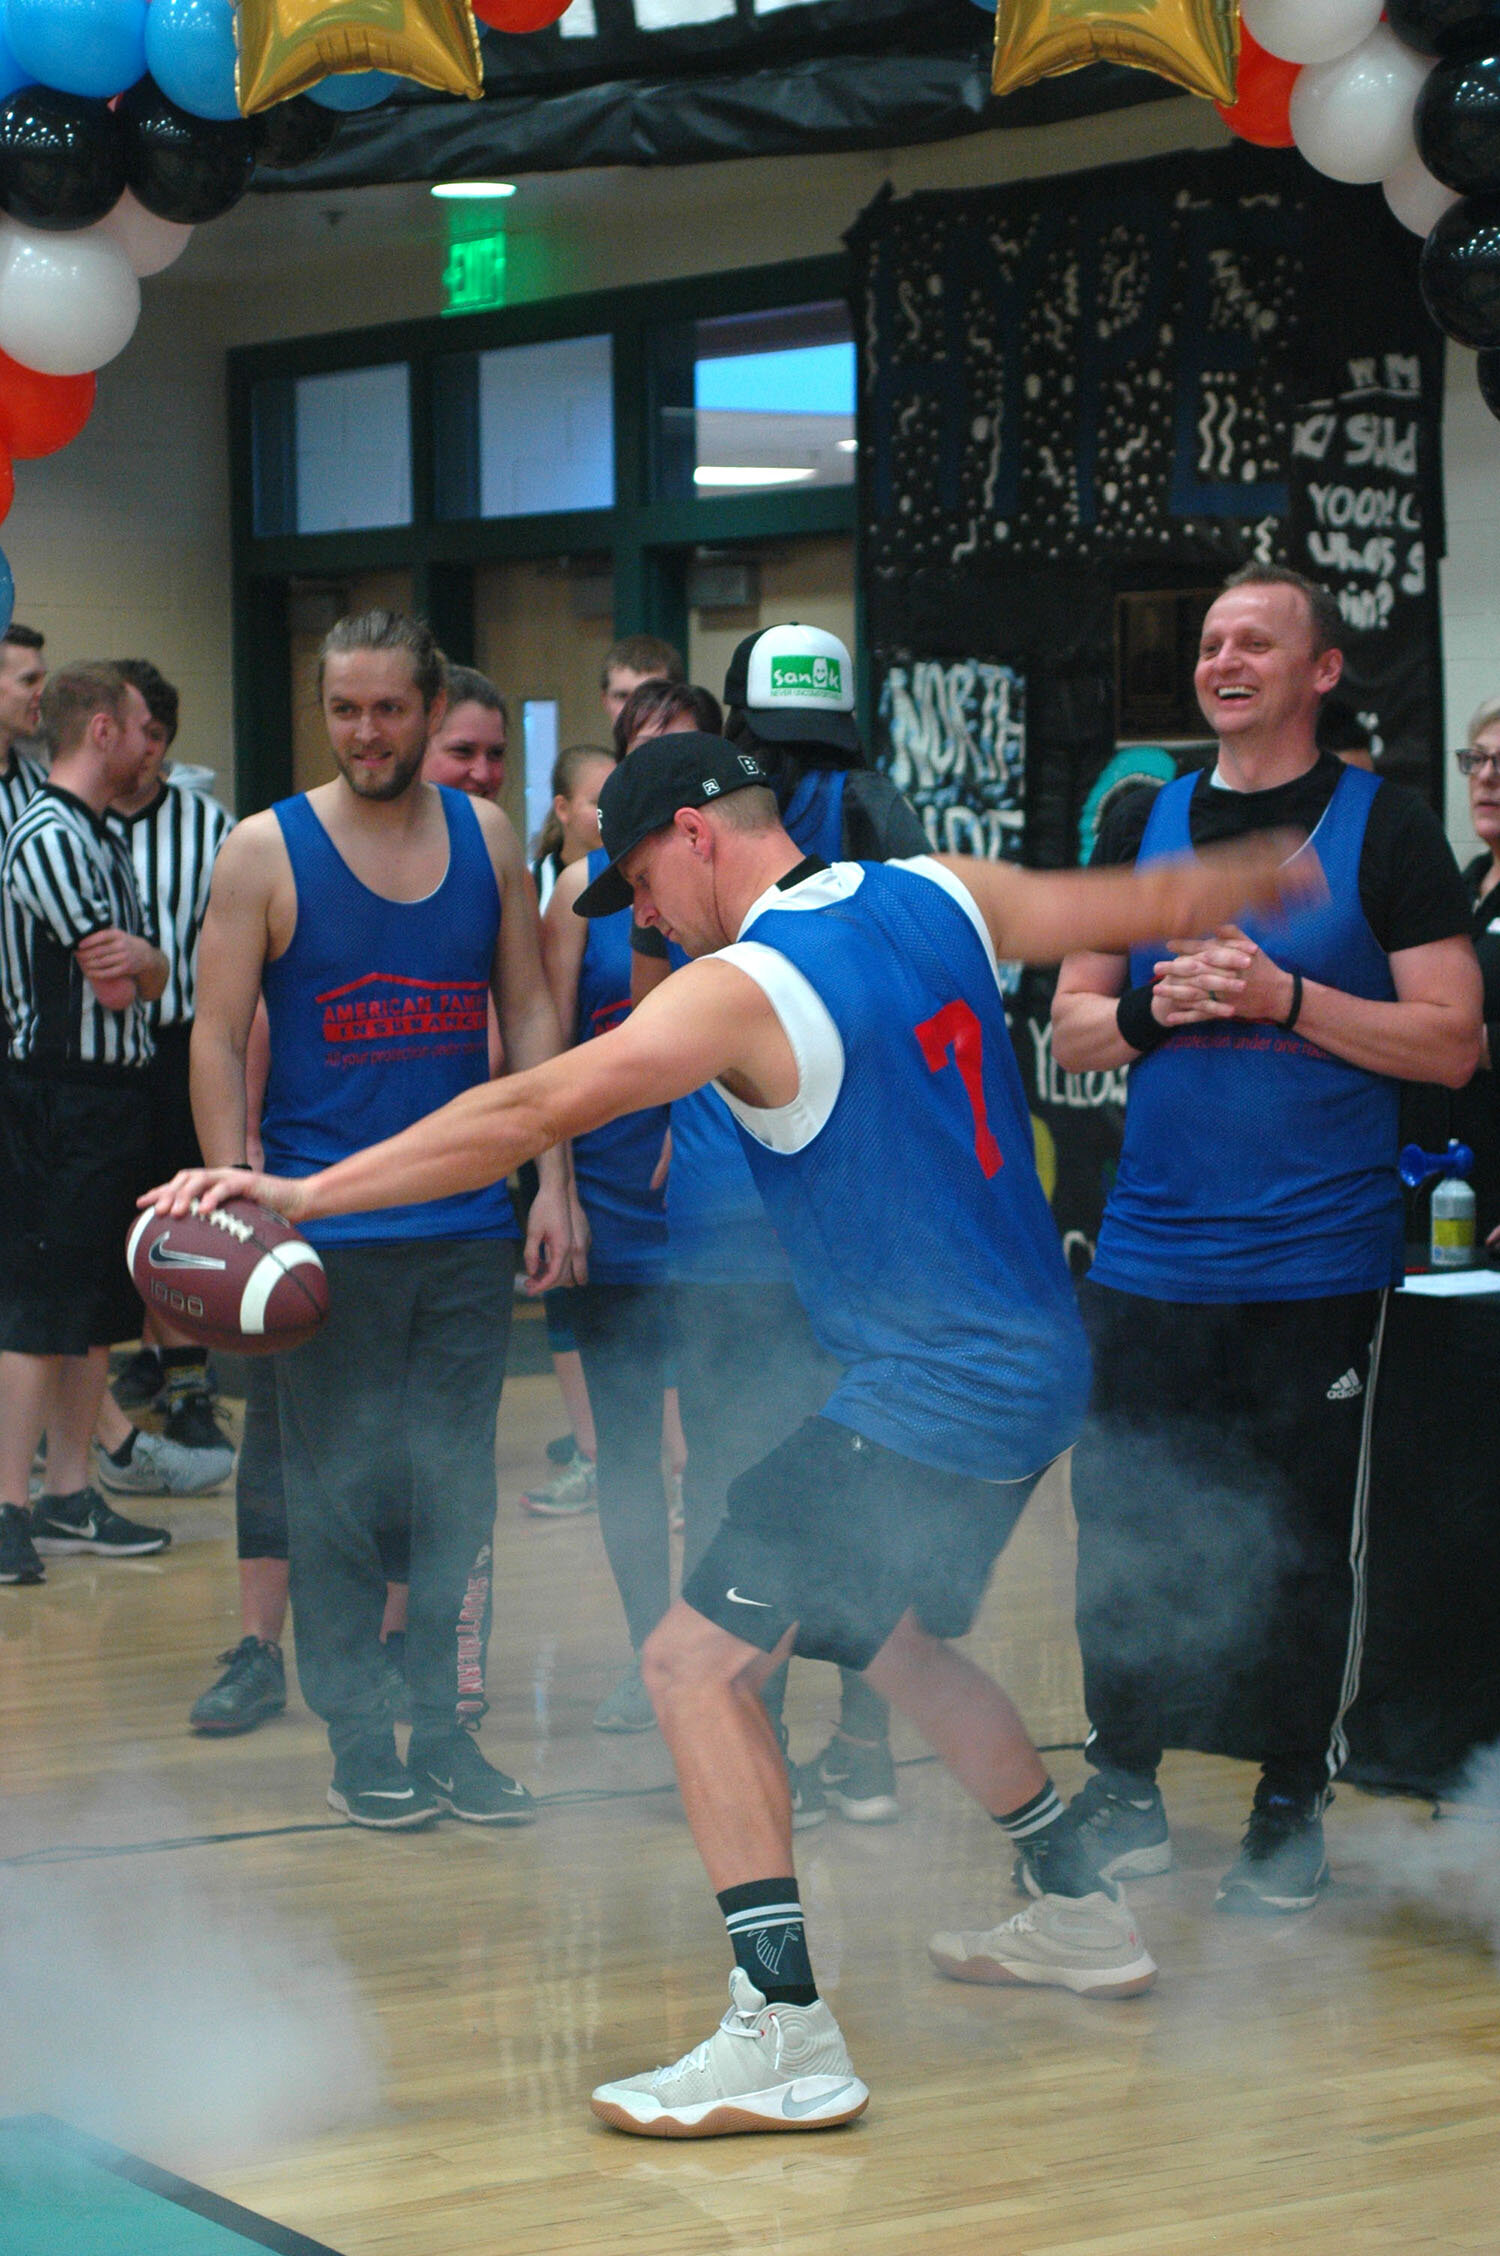 Man wearing a blue tanktop, shorts, and baseball cap dancing with fog around him in a gymnasium